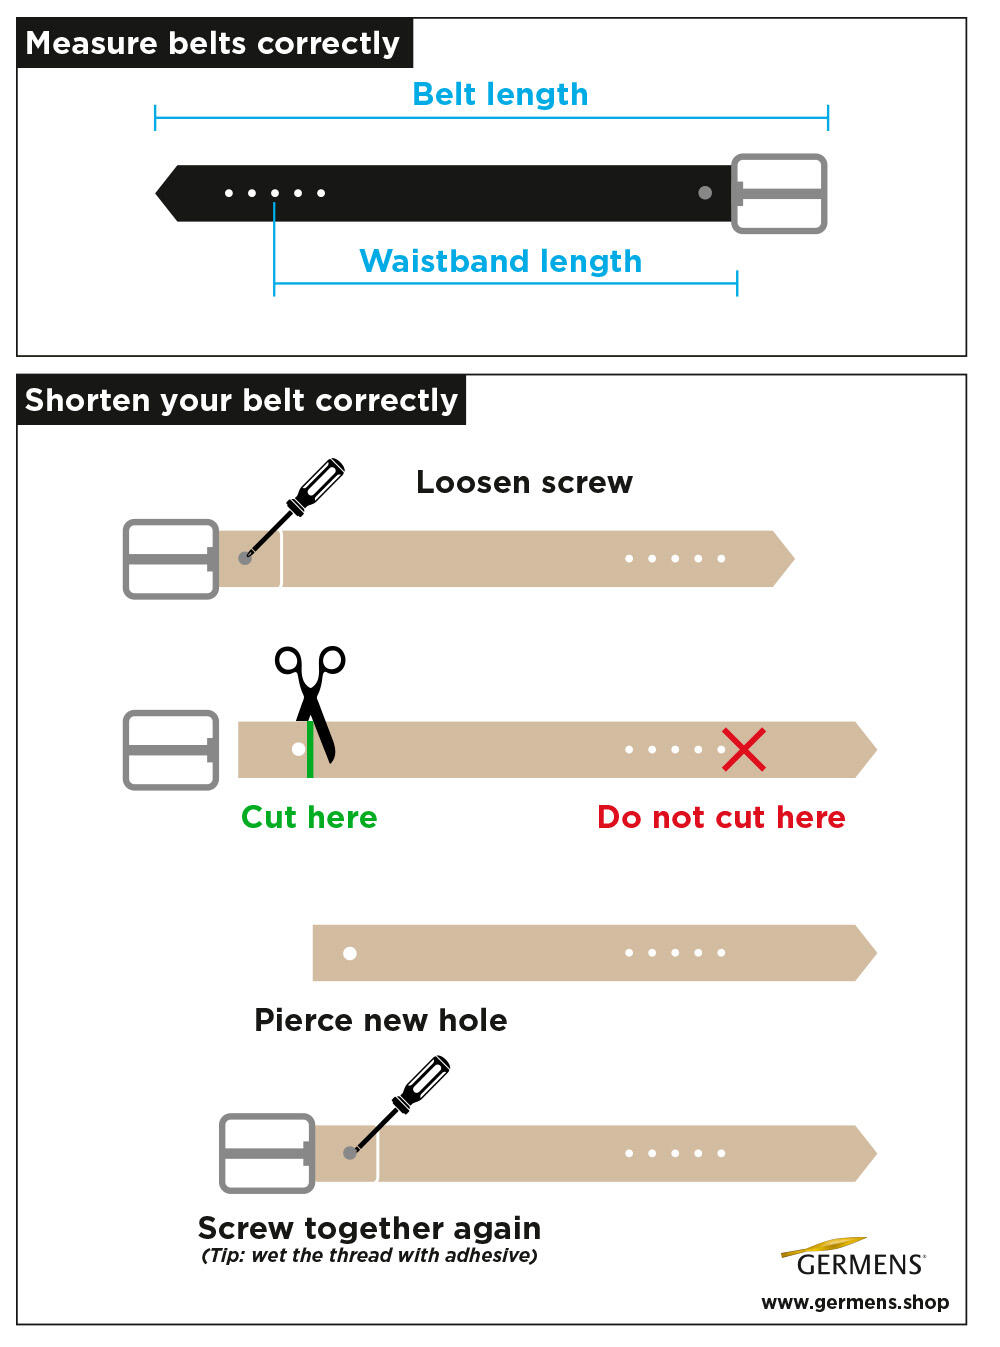 Correctly fitting and shortening men's belts